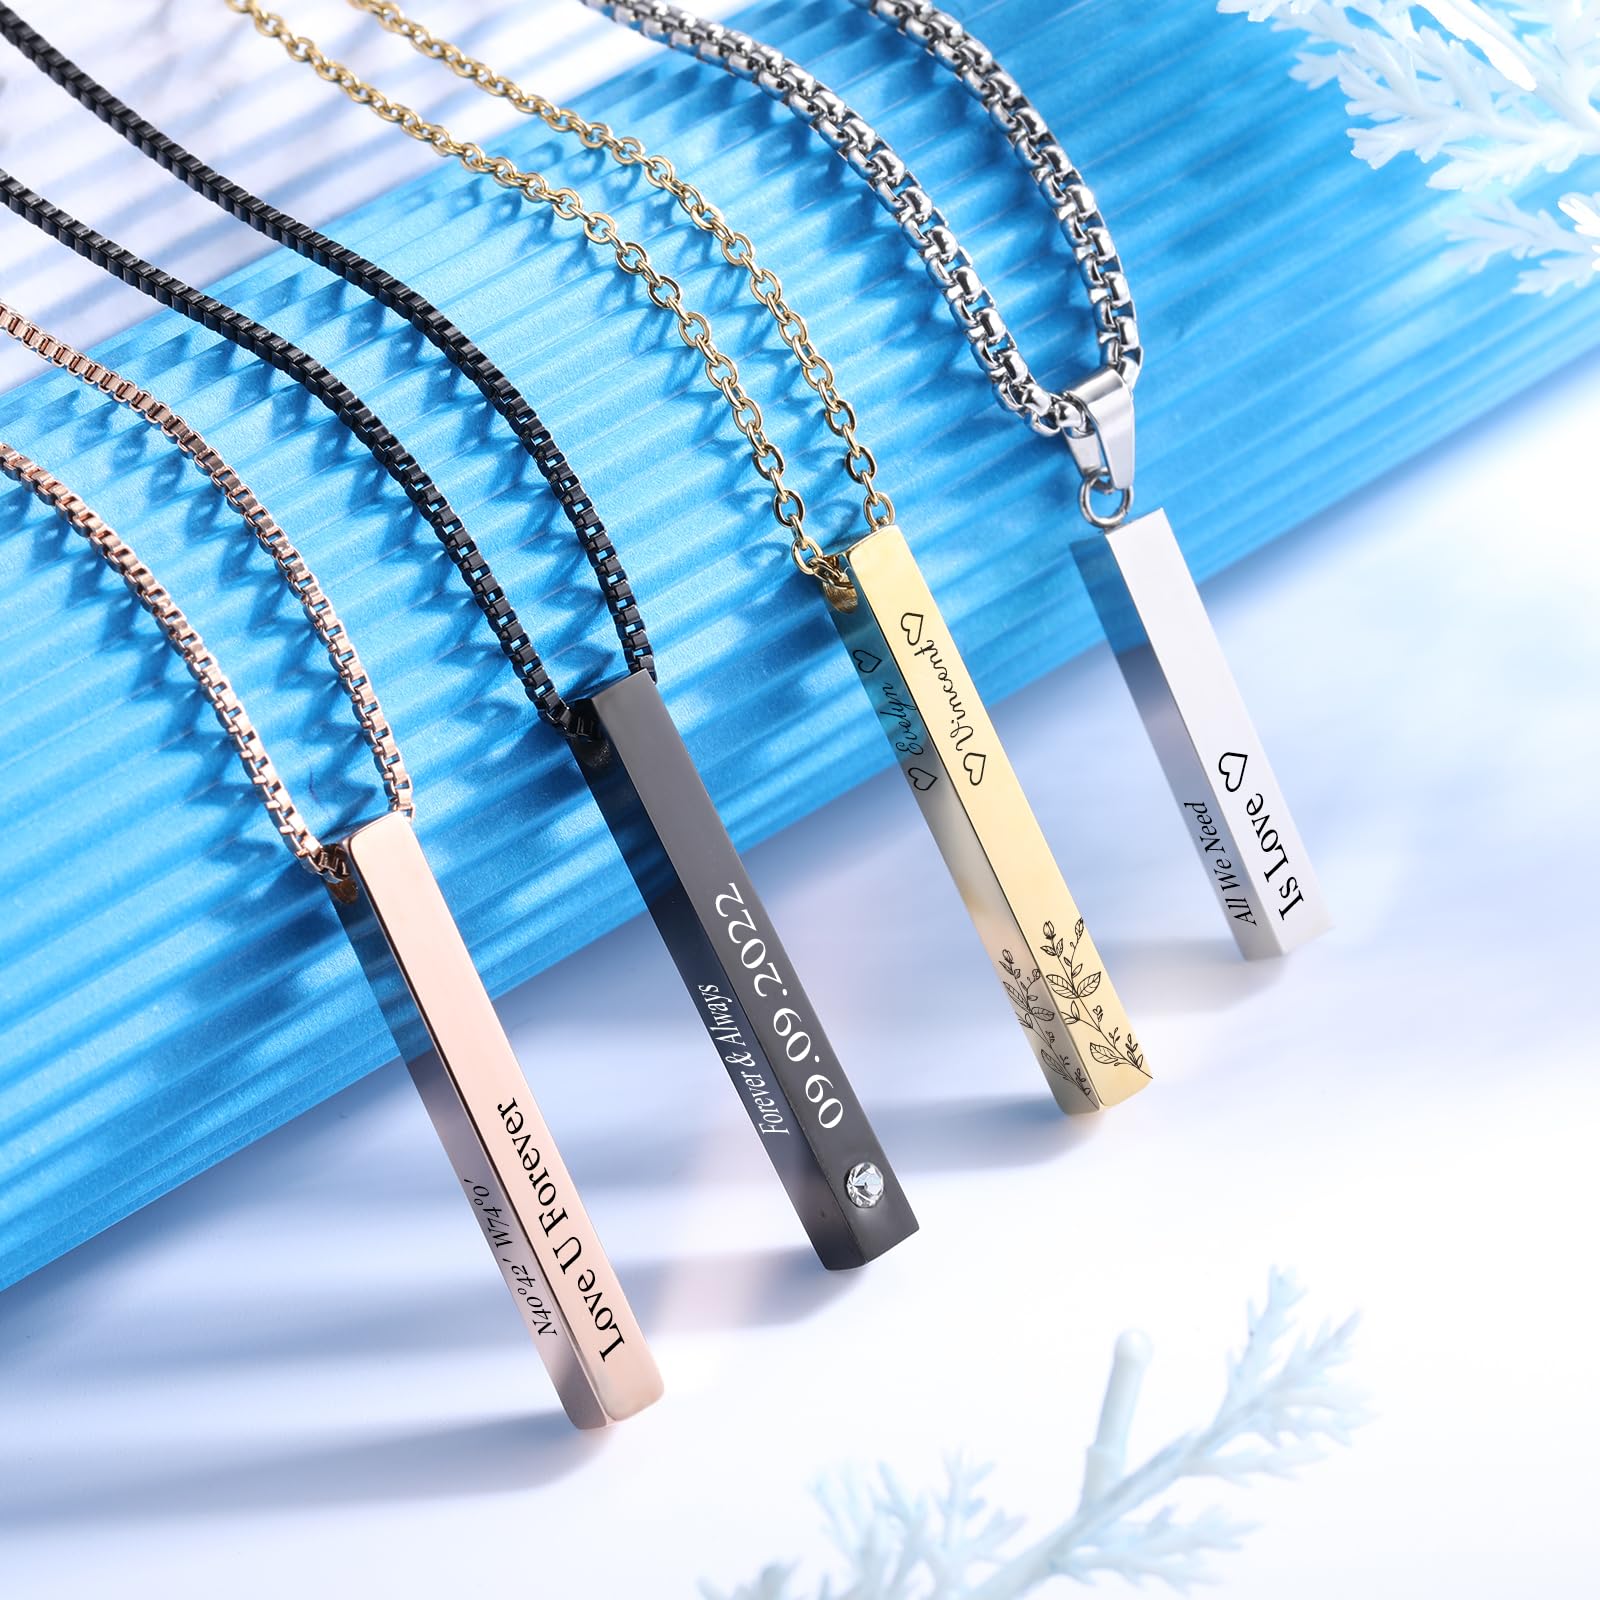 INBLUE Personalized Bar Necklace, 18K Gold Plated Custom Engravable Stainless Steel Rectangular Pendant, Charm Gift for Bridesmaids